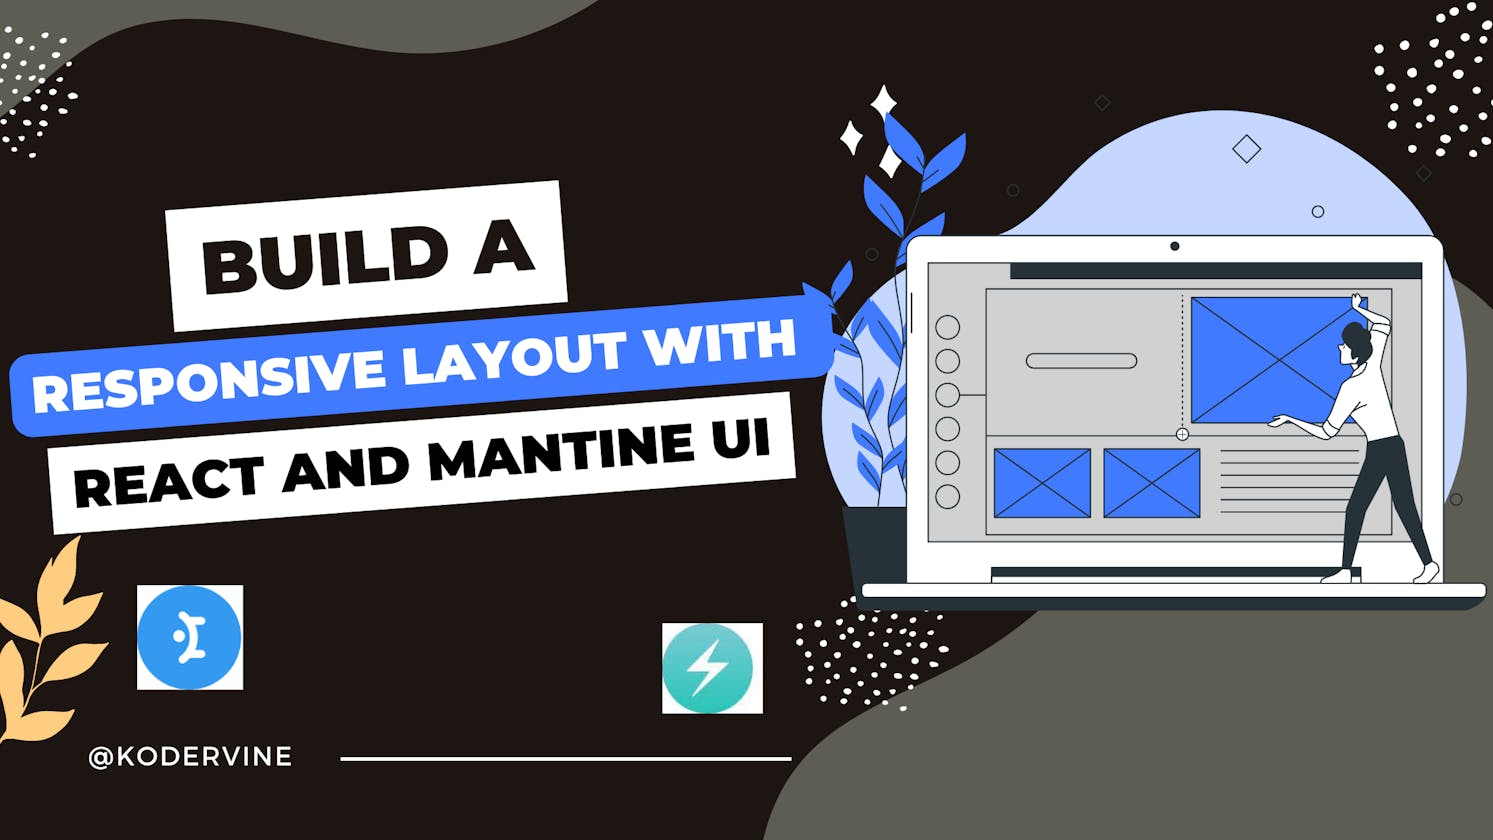 Build a Responsive Layout with React and Mantine UI